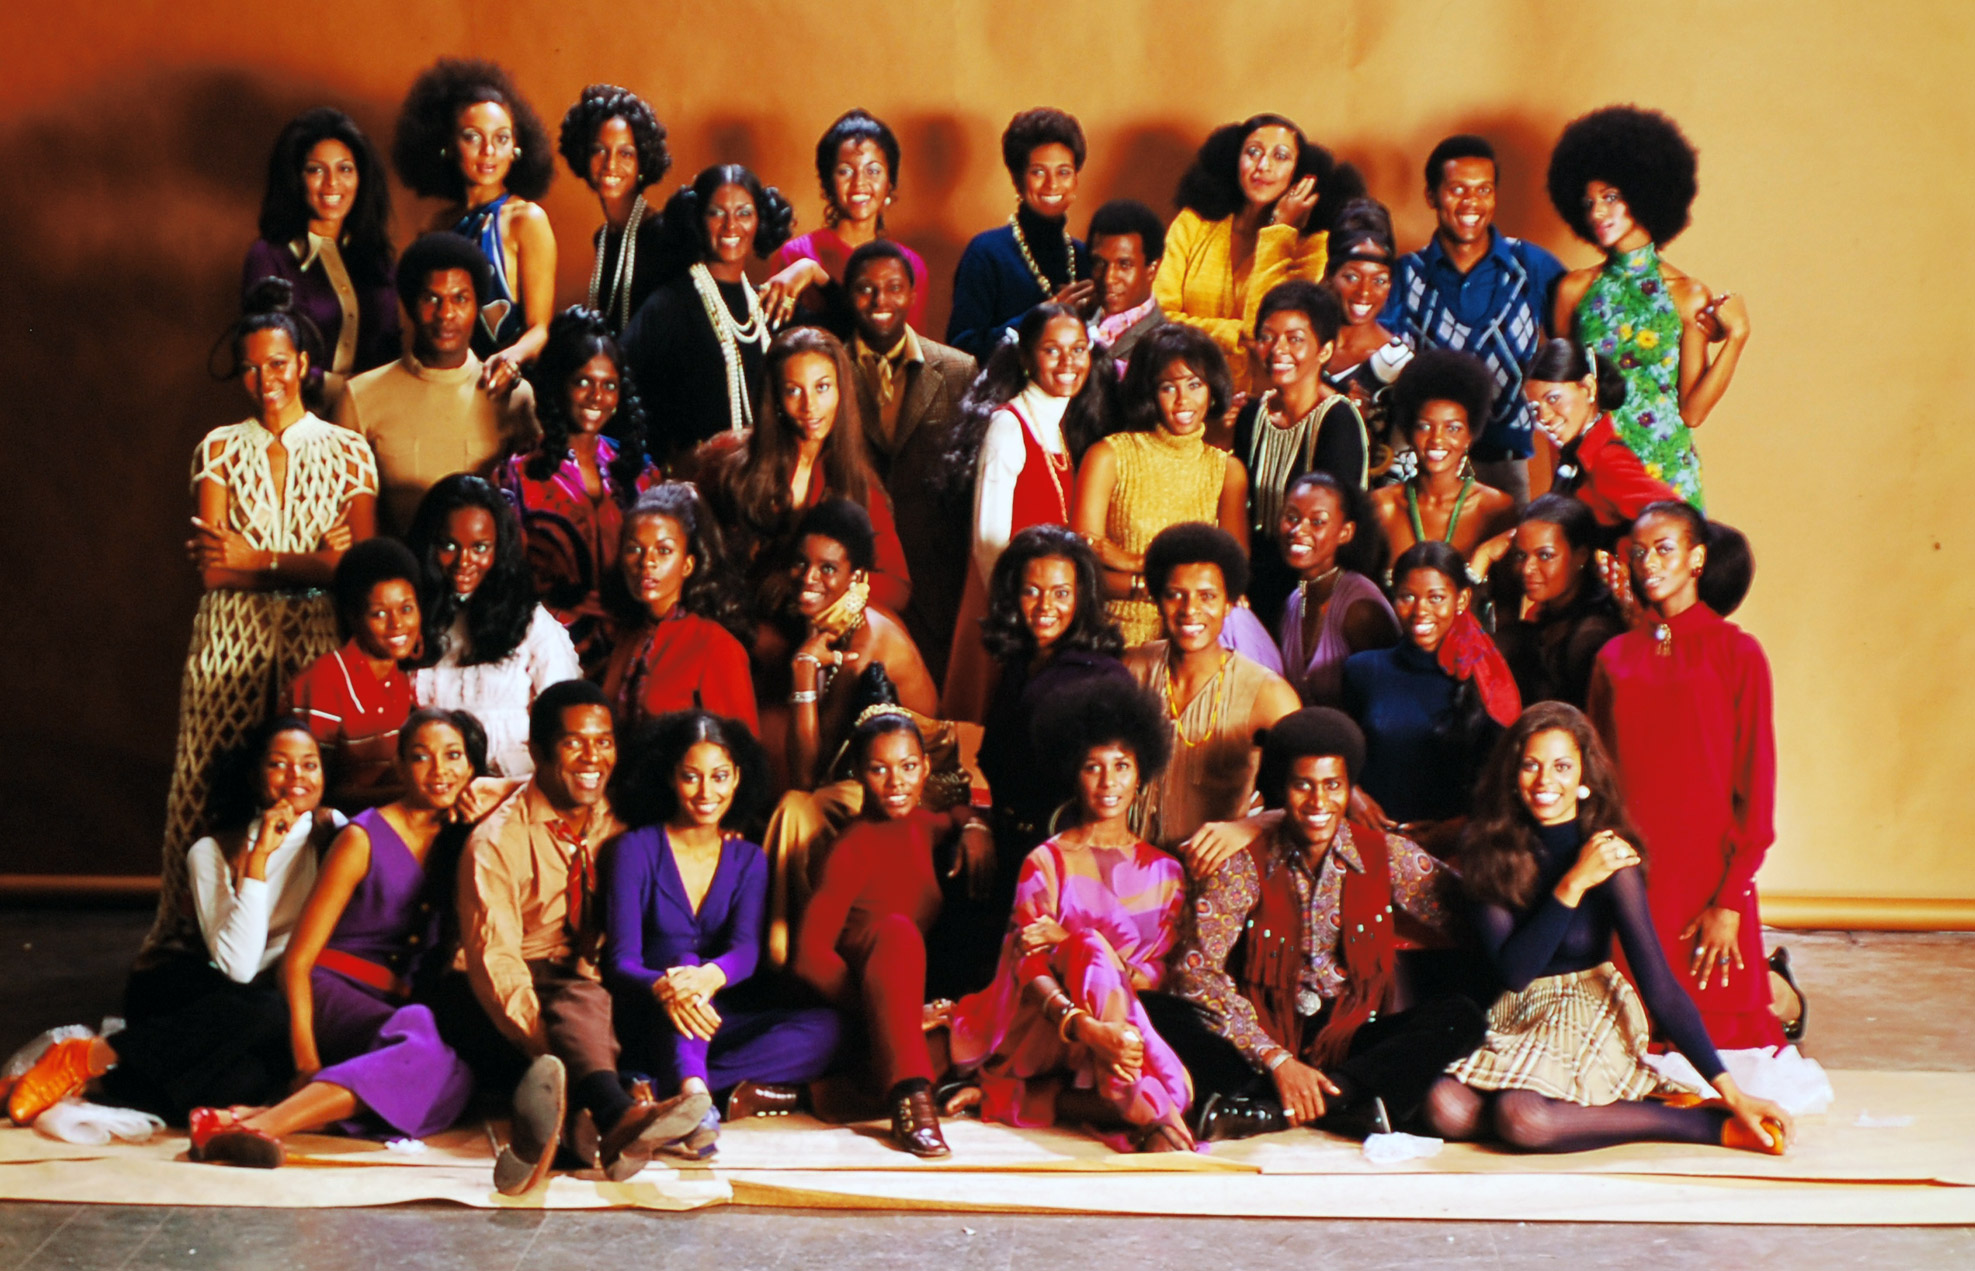 You see before you what may well be the most persuasive demonstration of successful black power ever assembled. If these 39 models, employed by a new agency called Black Beauty were to all work an eight-hour day, their combined bill would be $16,000.